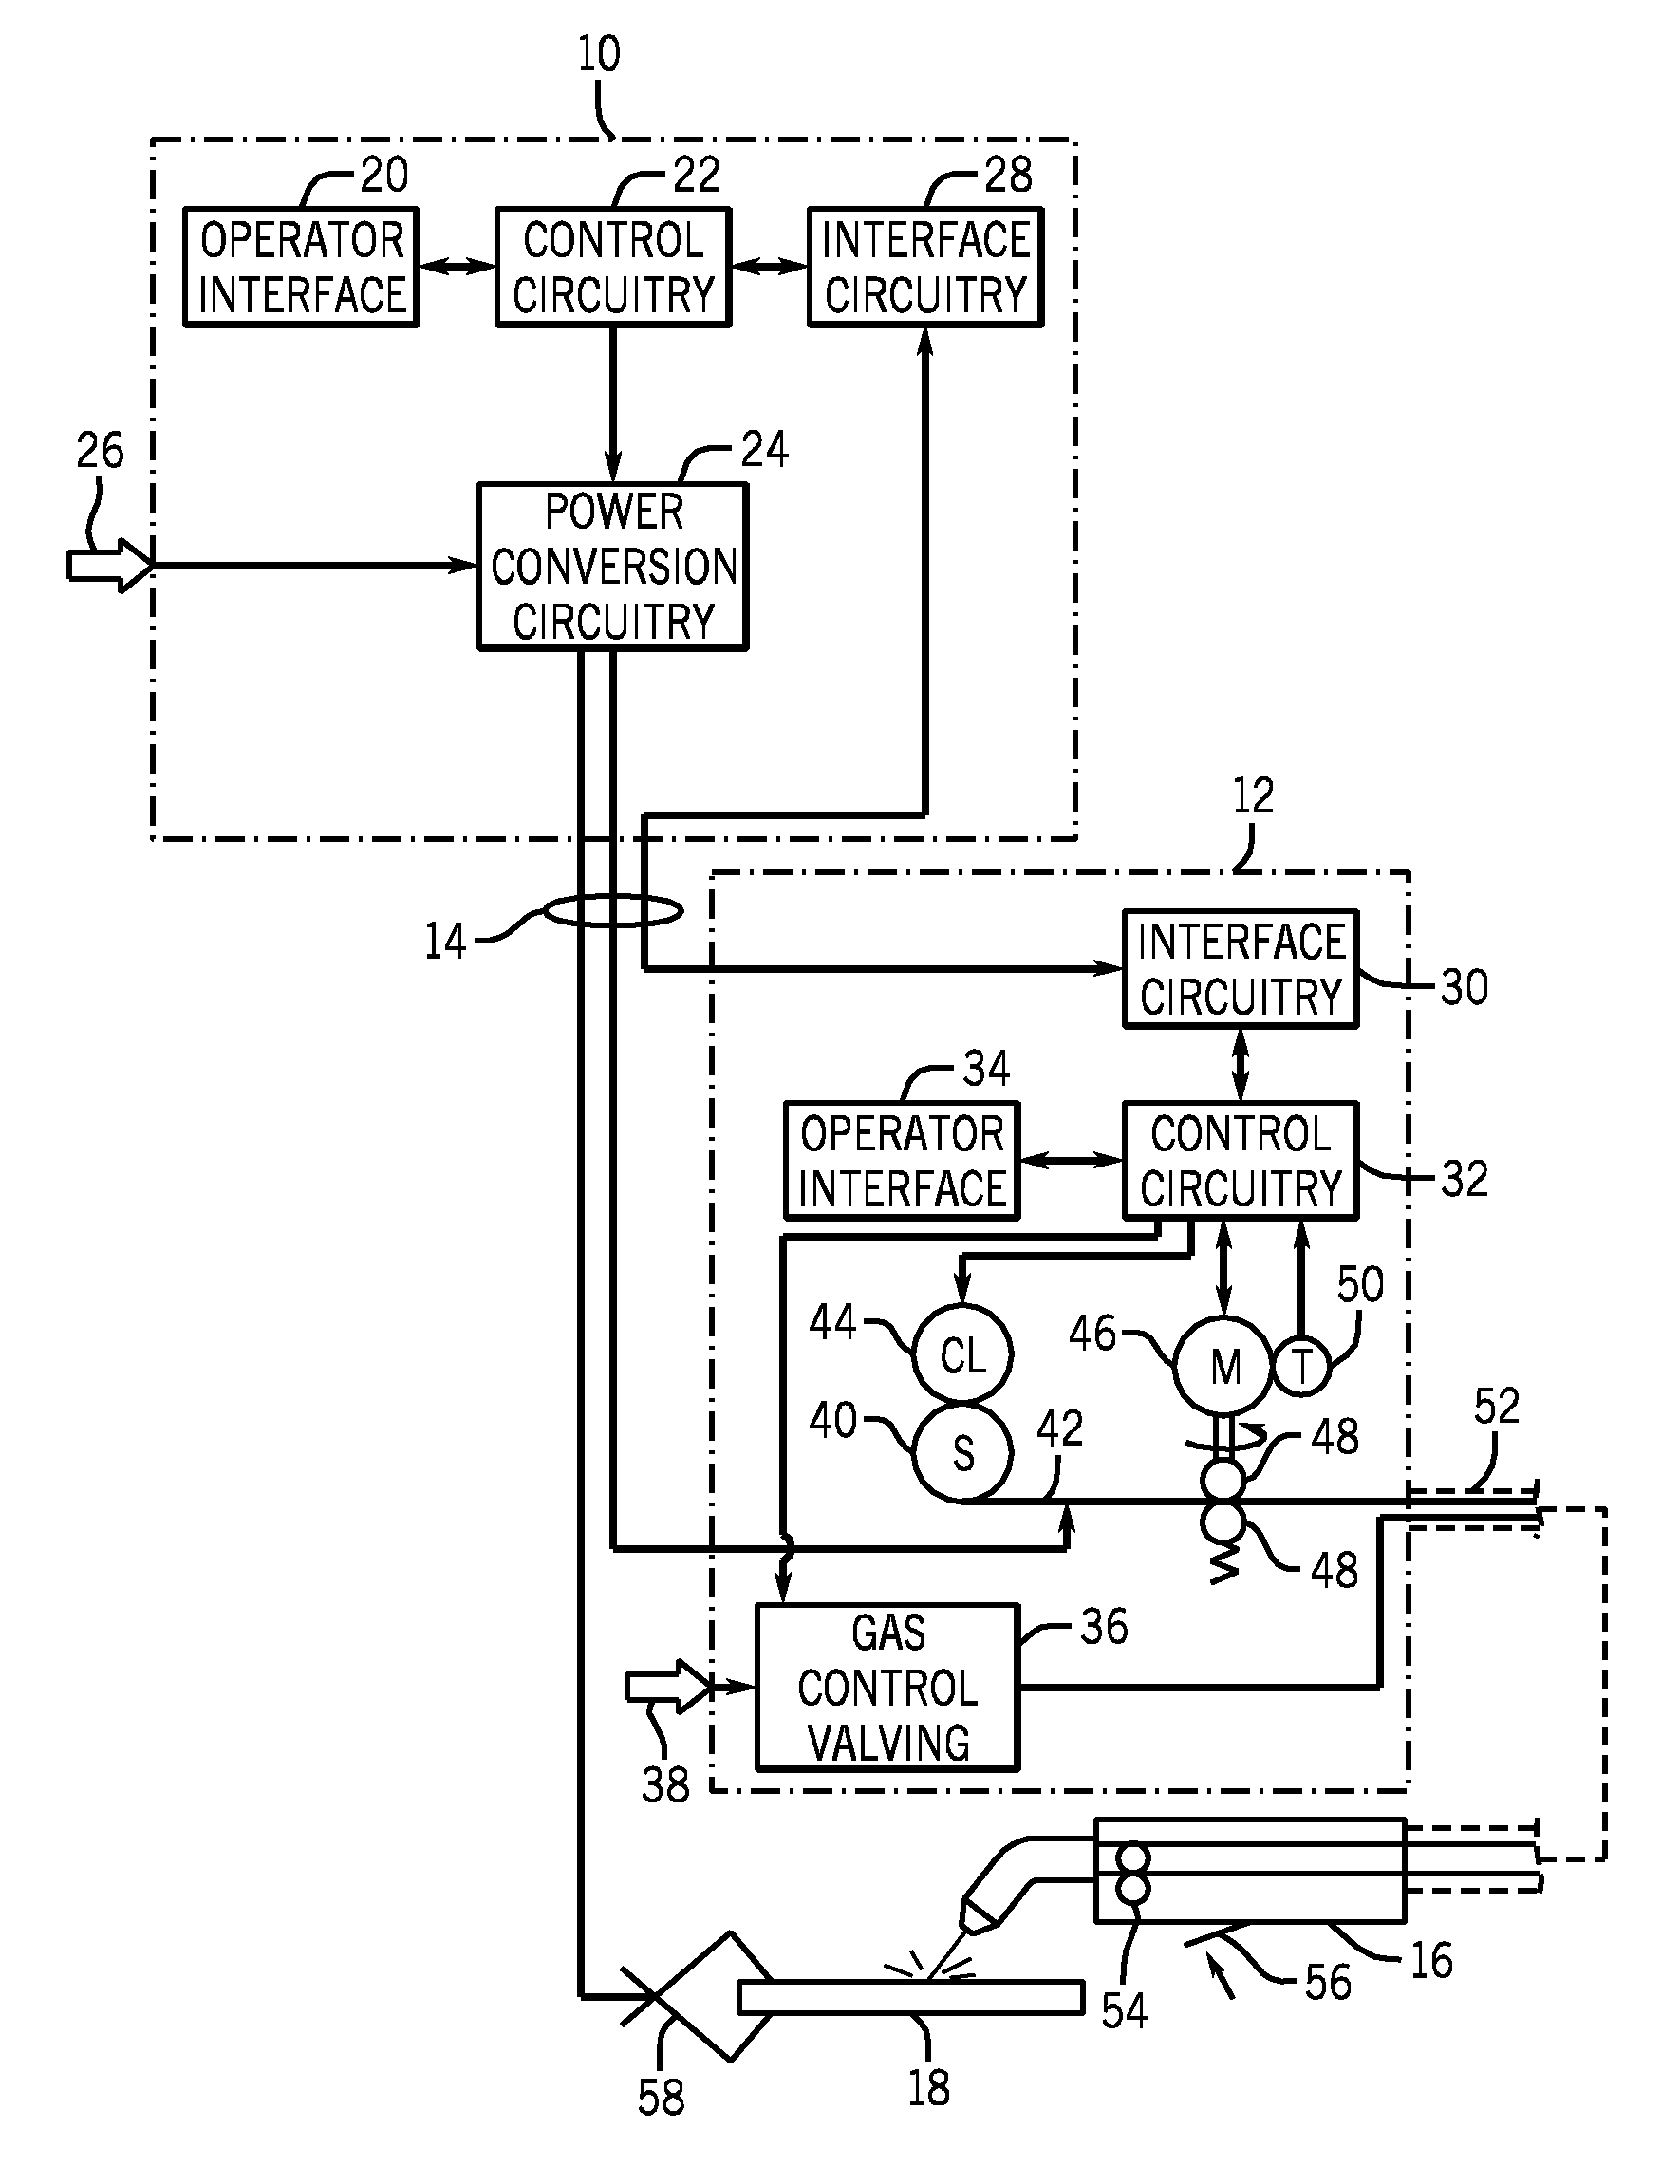 Welding electrode stickout monitoring and control